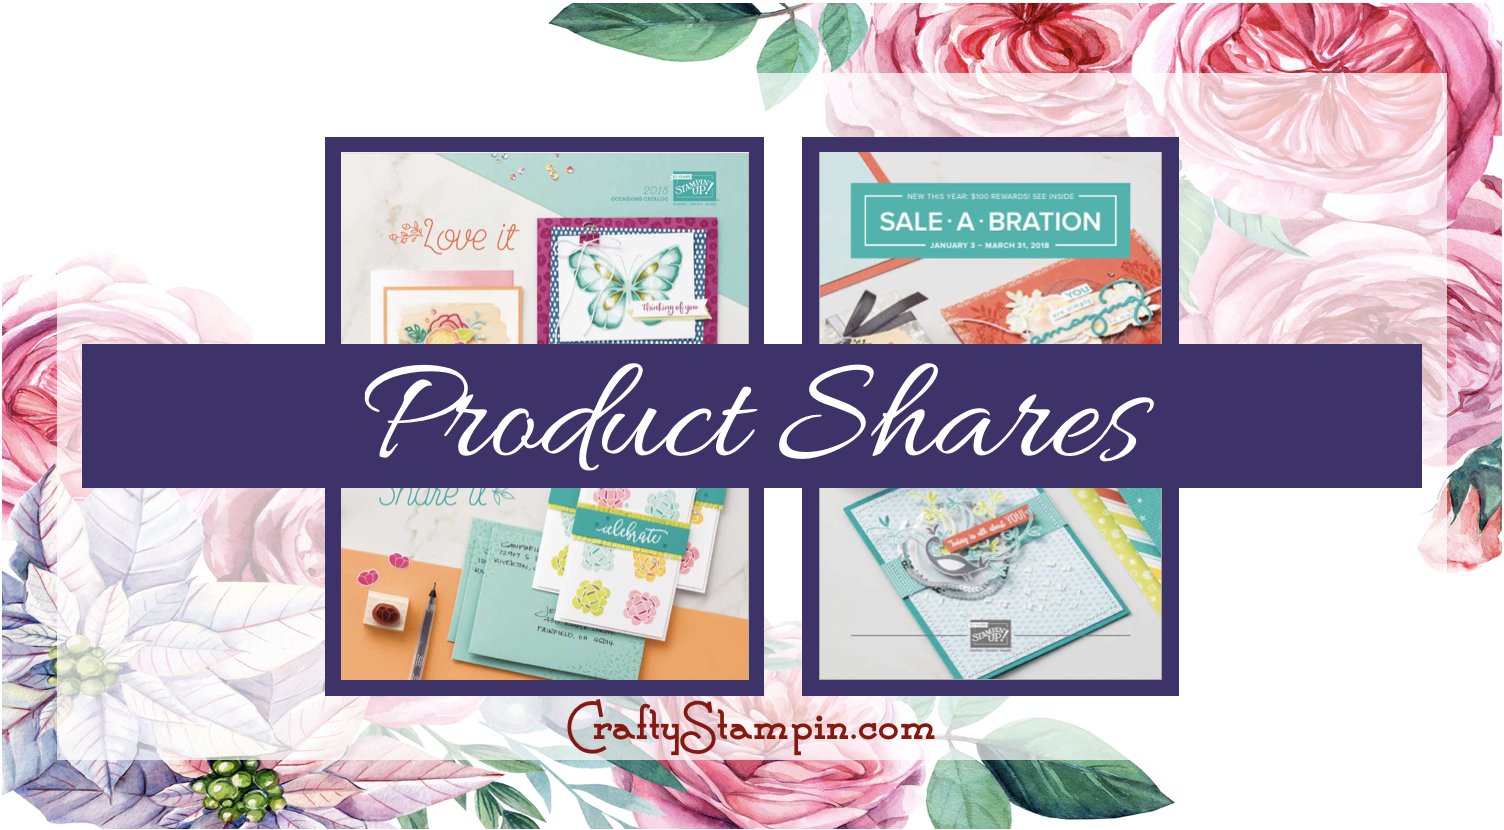 2018 Occasions & Sale-a-bration Catalog Product Shares | Stampin Up Demonstrator Linda Cullen | Crafty Stampin’ | Purchase your Stampin’ Up Supplies